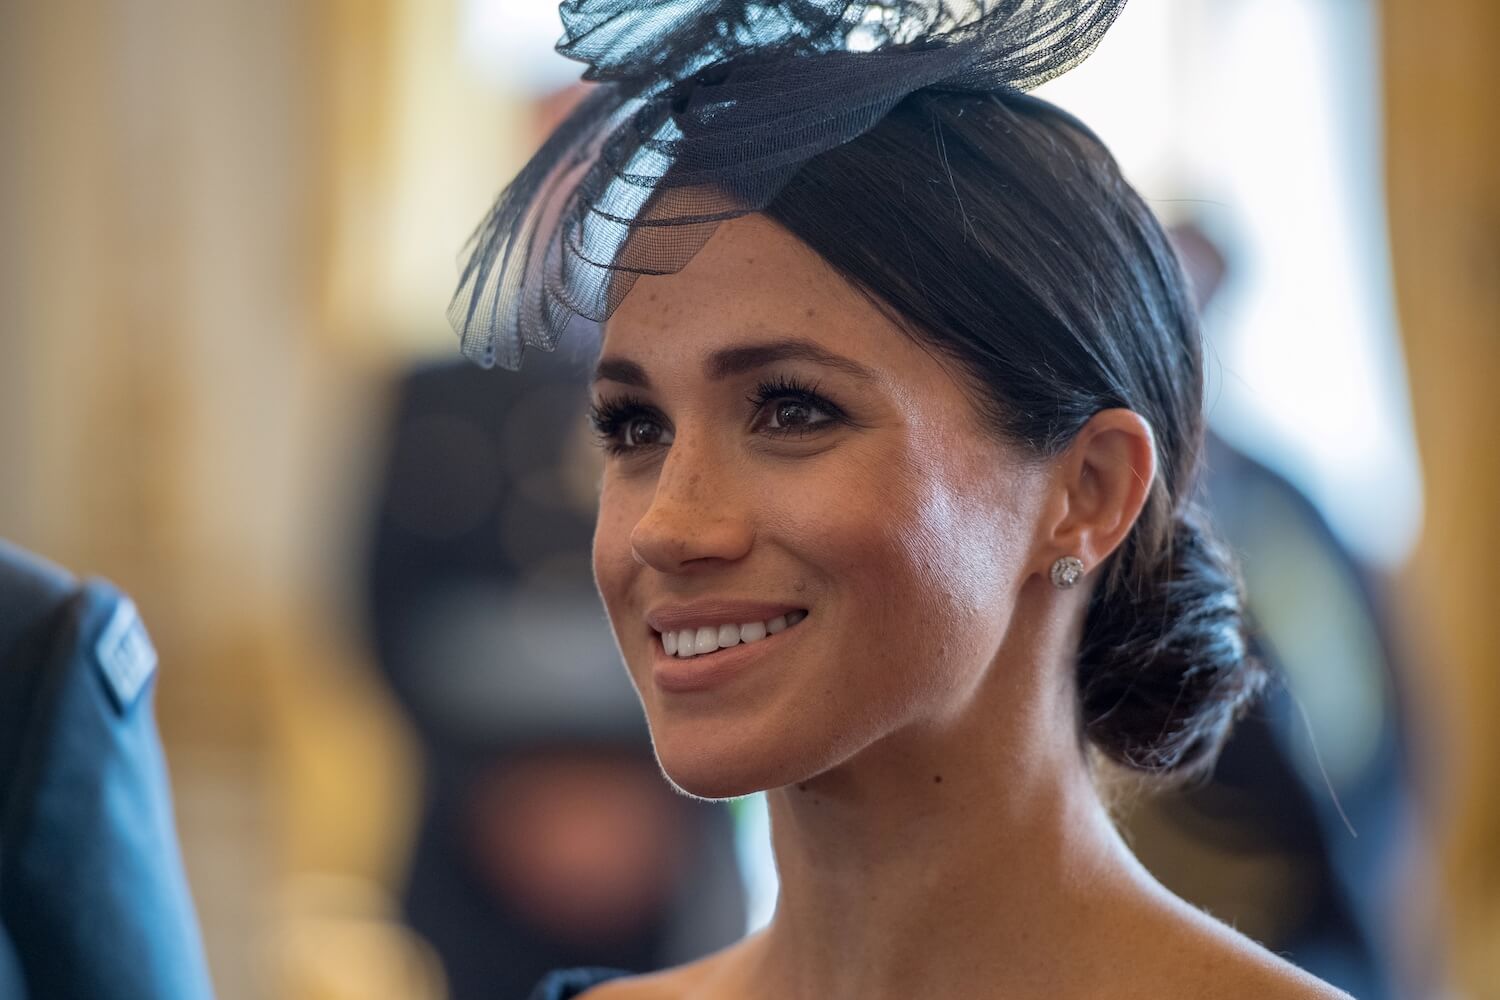 Meghan Markle smiles while wearing a black fascinator hat